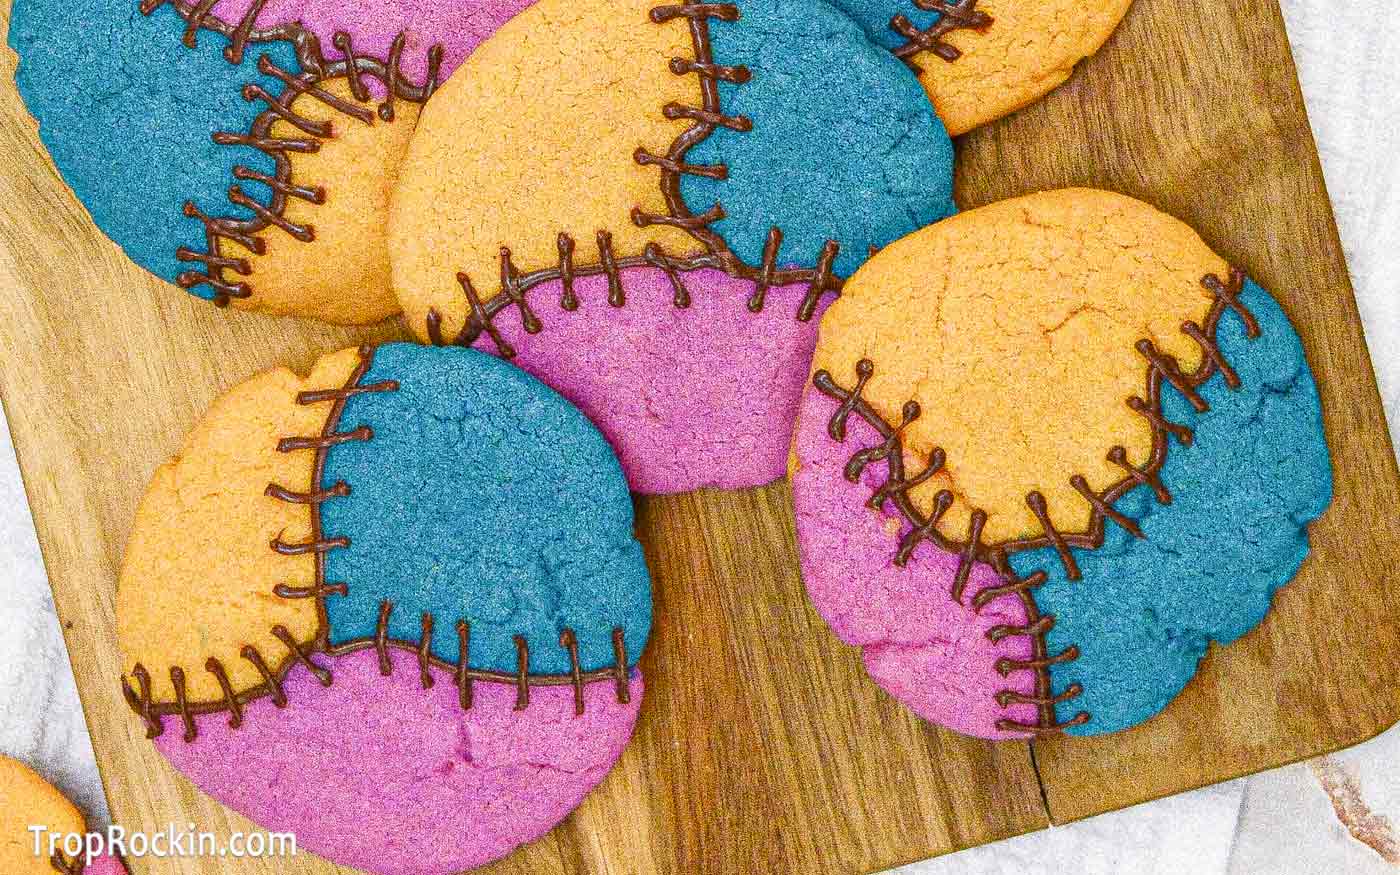 Nightmare Before Christmas Cookies: Tri-colored sugar cookies in yellow, turquoise and pink with chocolate stitches along the seams between colors. Displayed on a wooden cutting board.